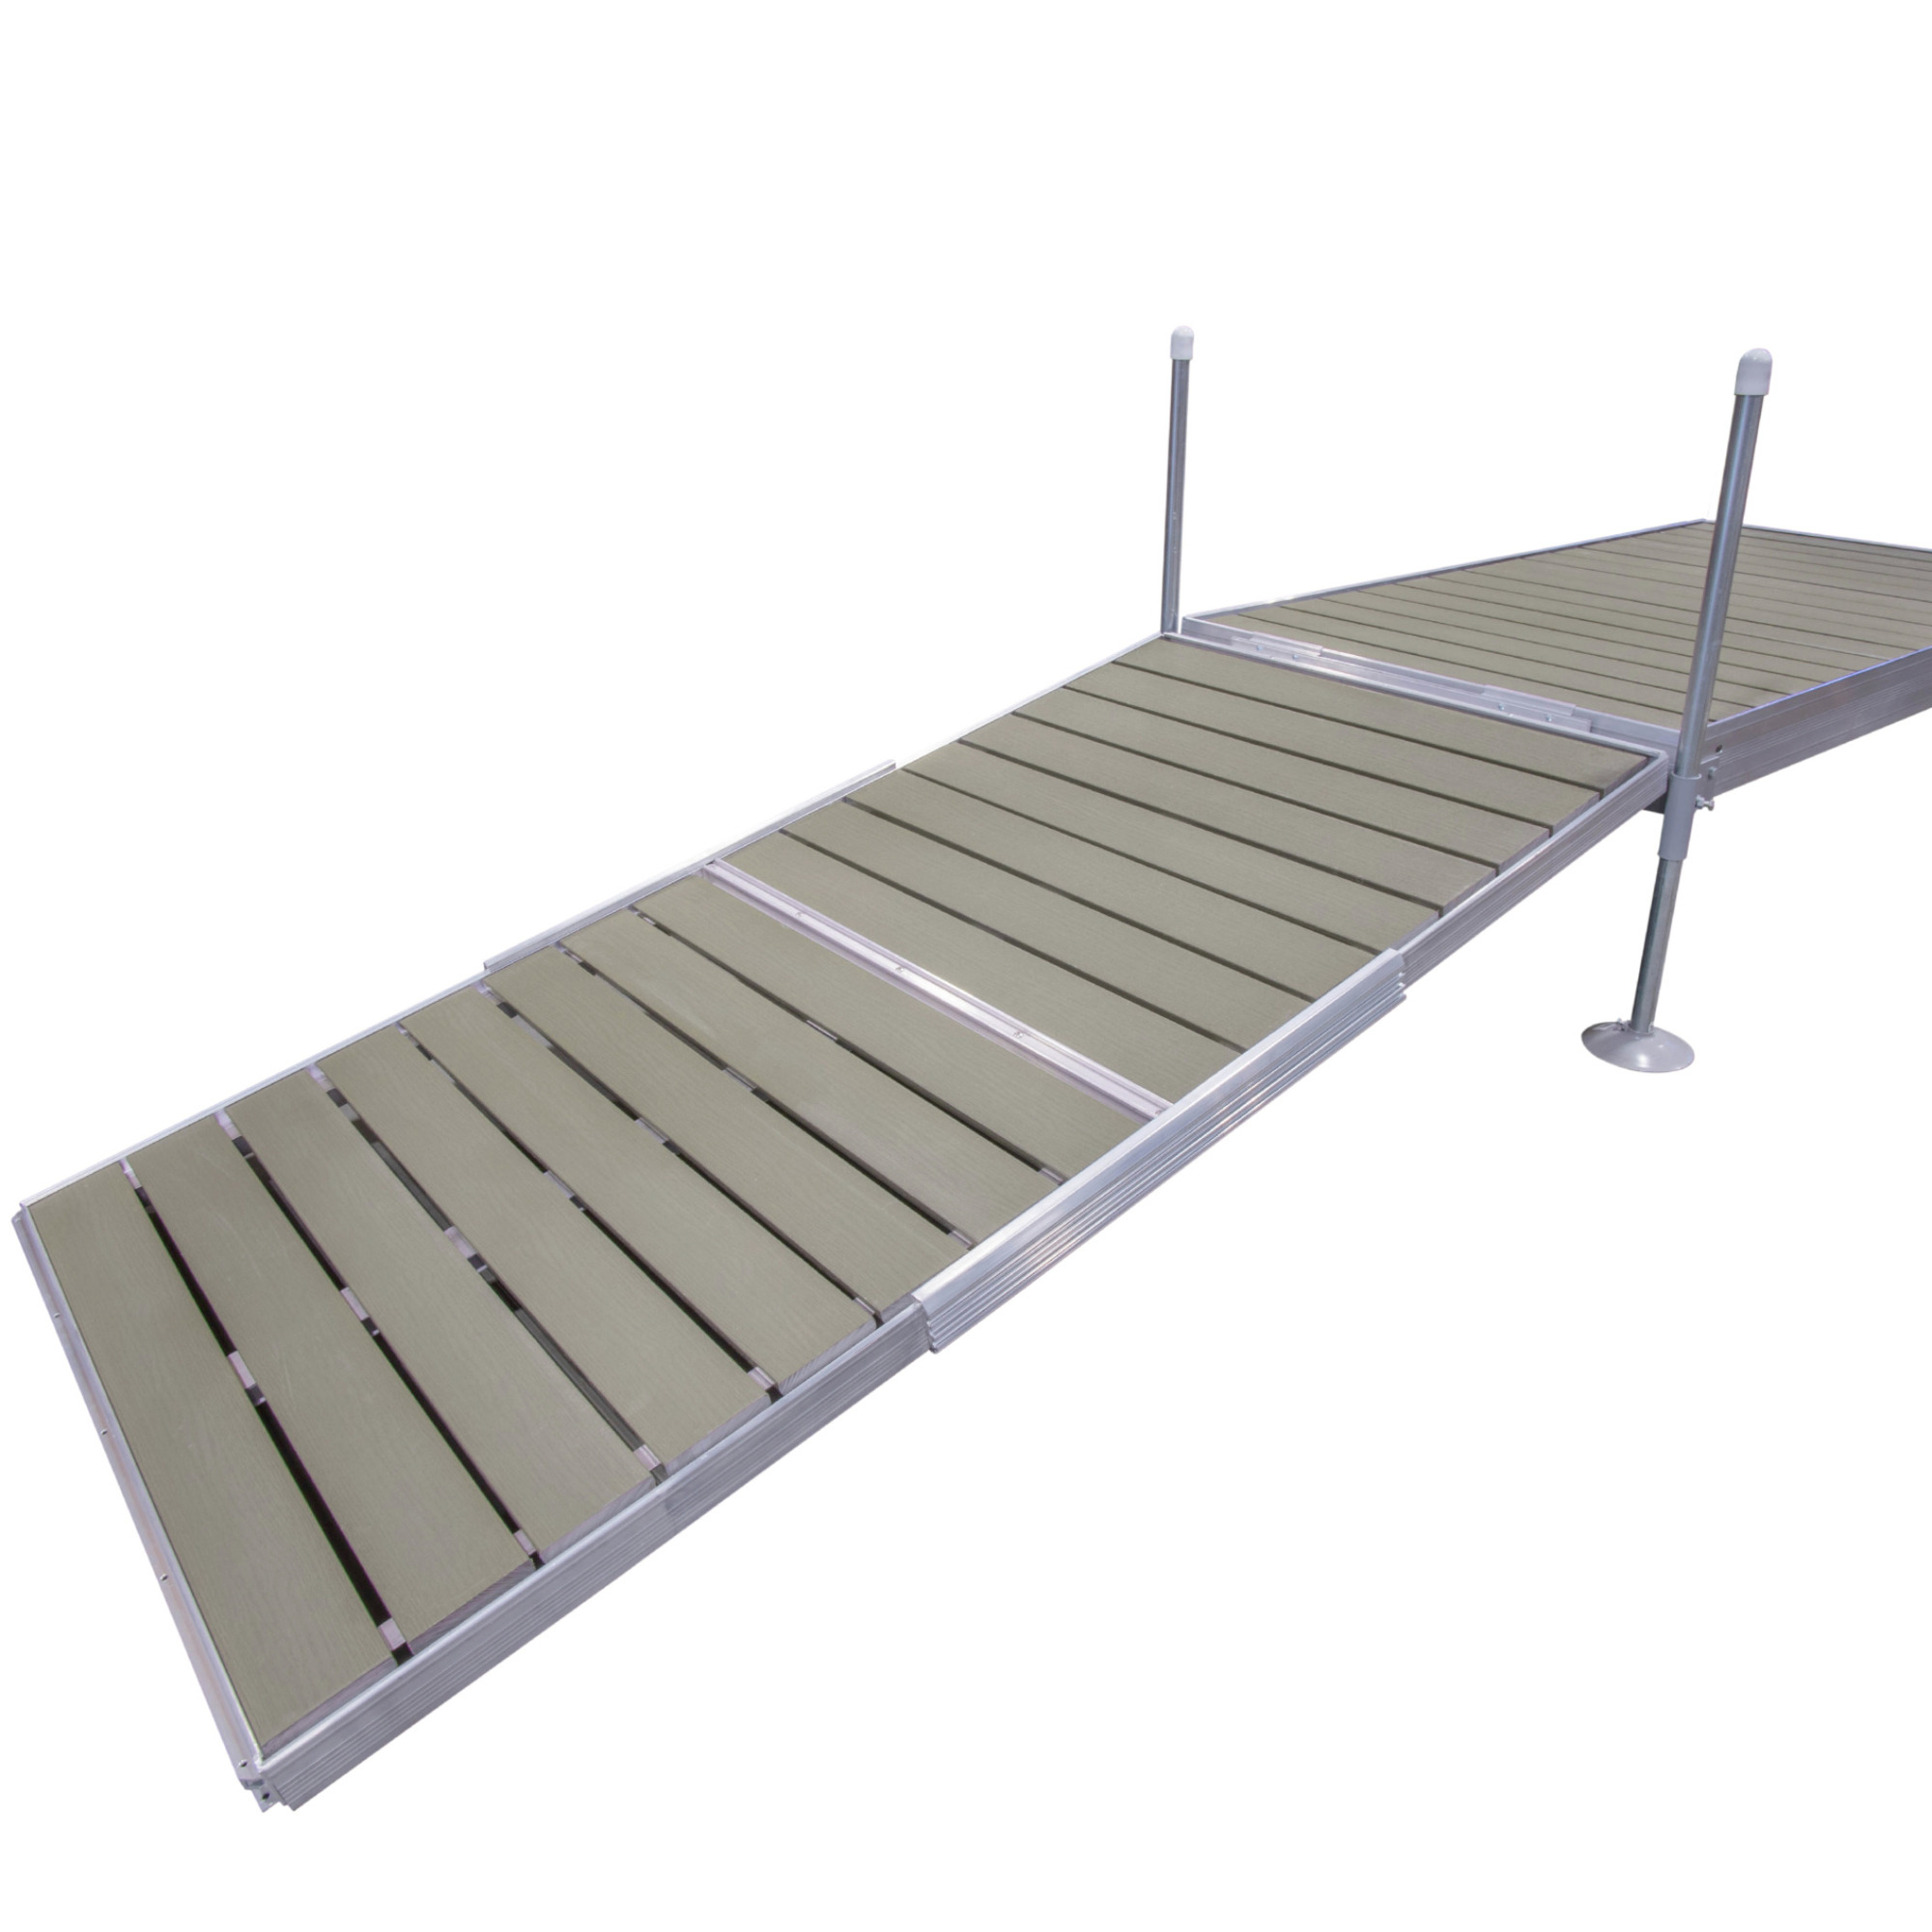 Tommy Docks, 8ft. TD Gray Composite Gangway, Product Type Gangway Kit, Length 65 in, Width 30 in, Model TDGWCG-30531